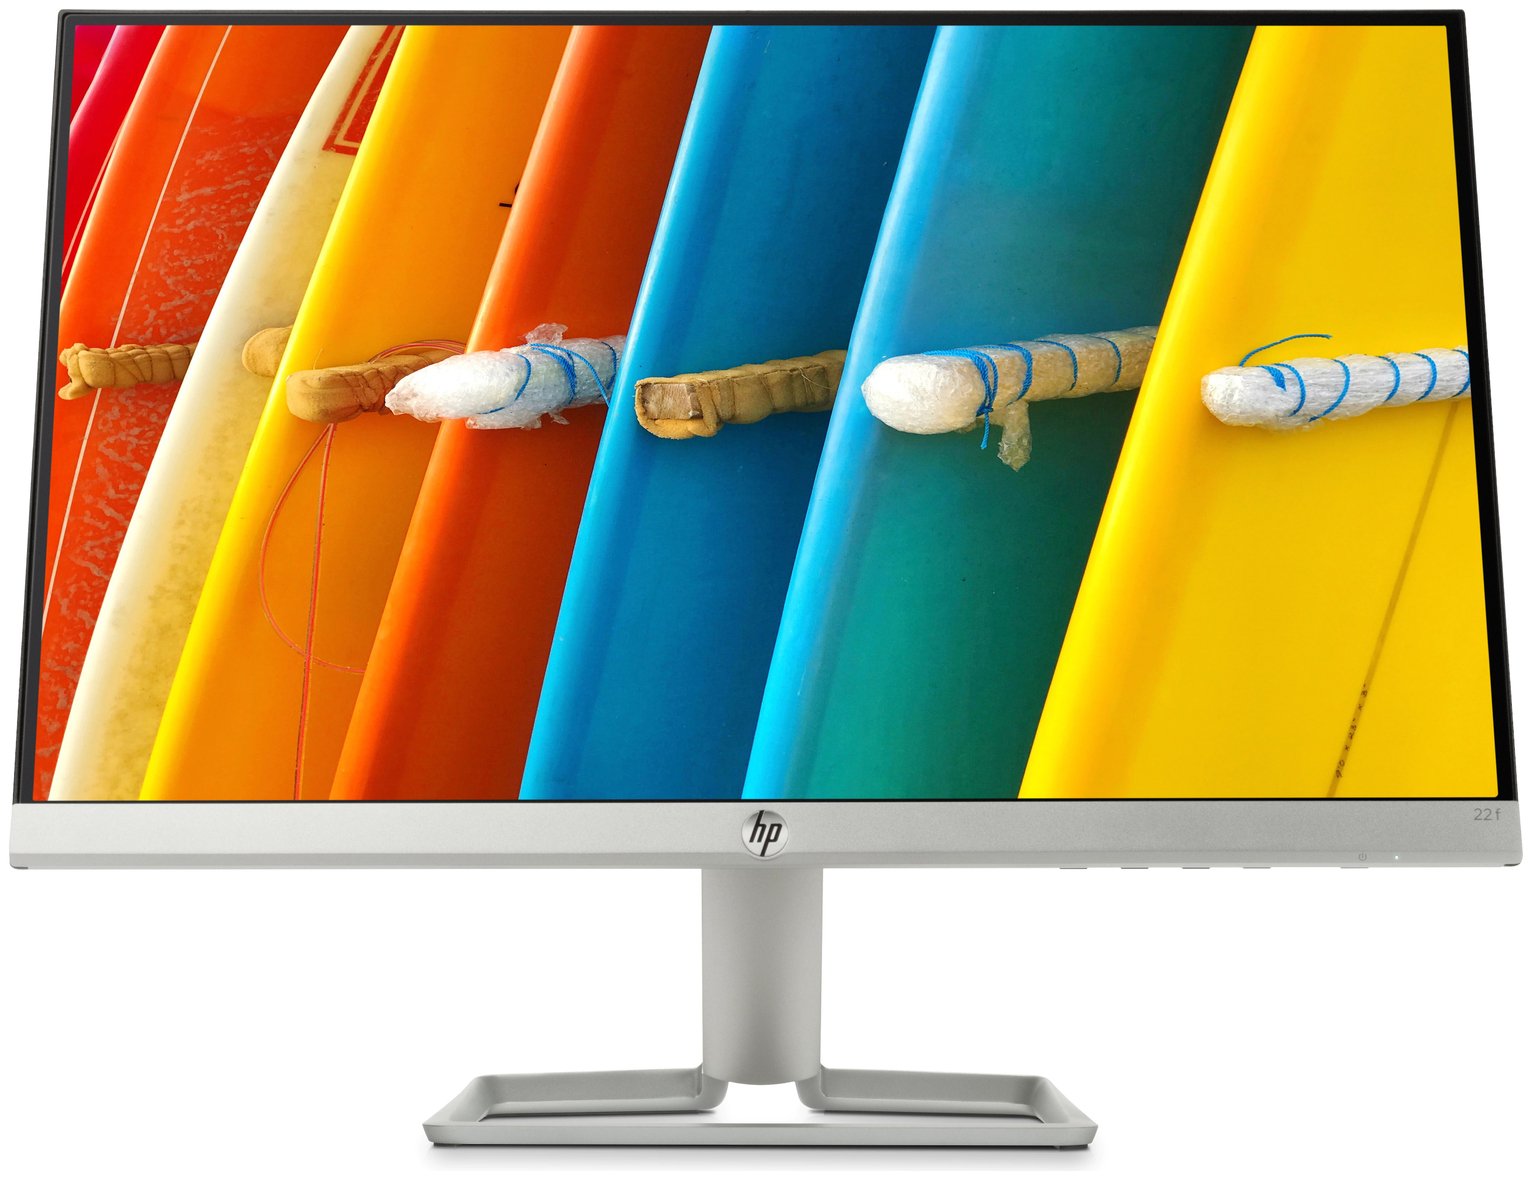 HP 22f 21.5 Inch FHD Ultraslim IPS Monitor review